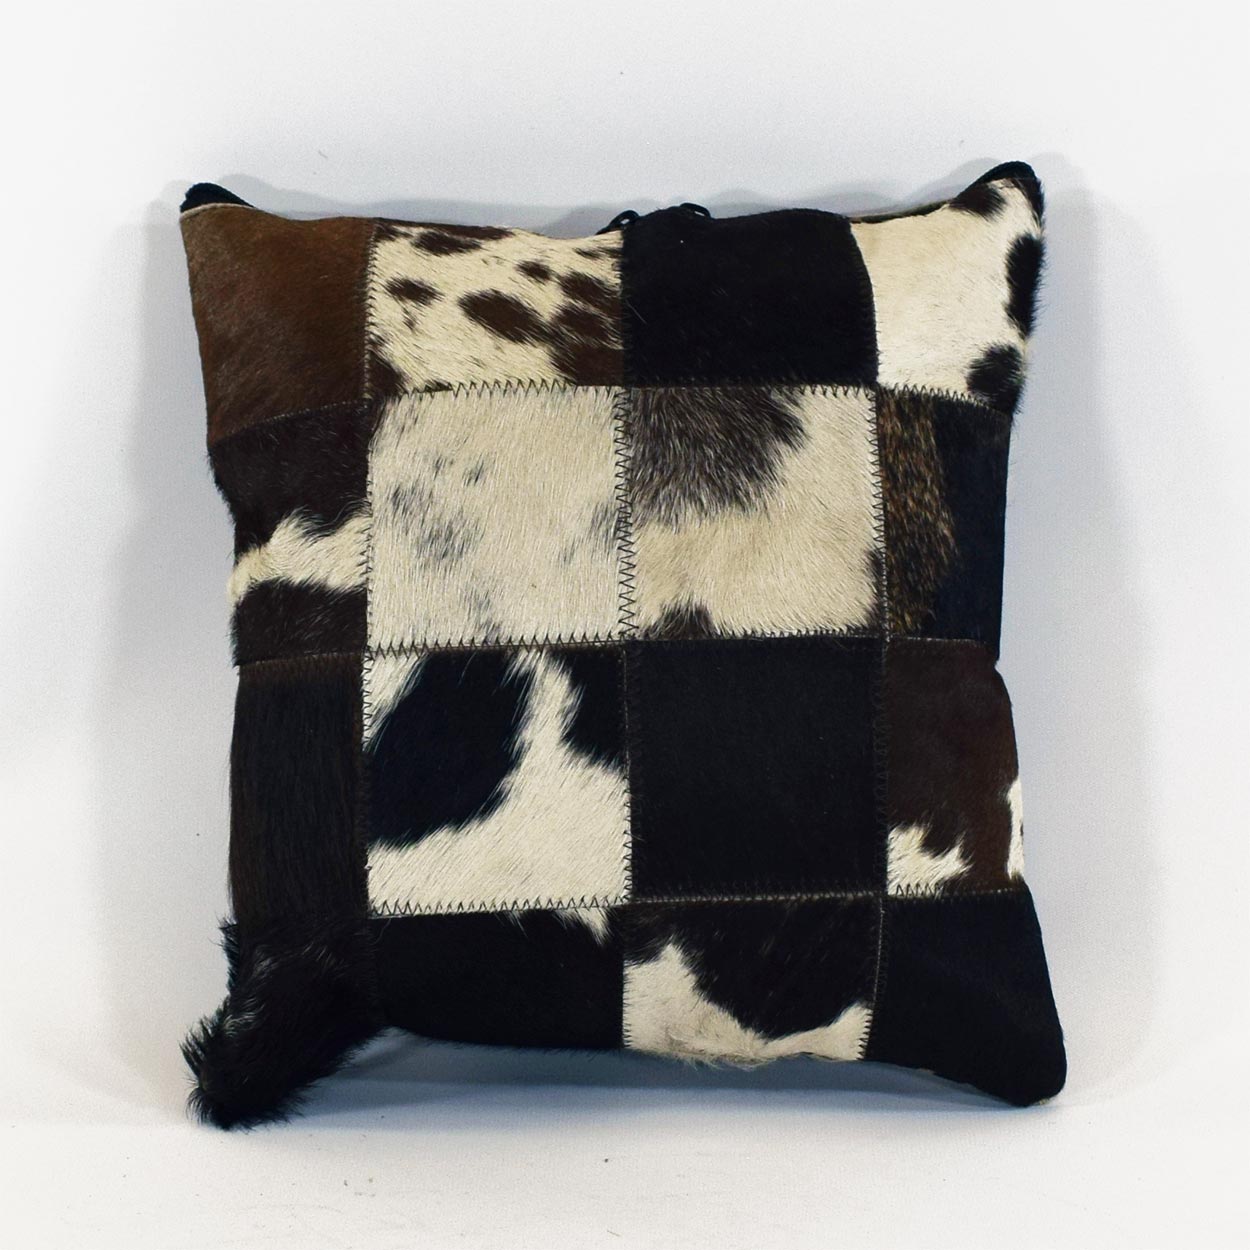 322026-1 - 12 x 12 Cowhide Pillow Patchwork Tri-color Spotted 322026-1